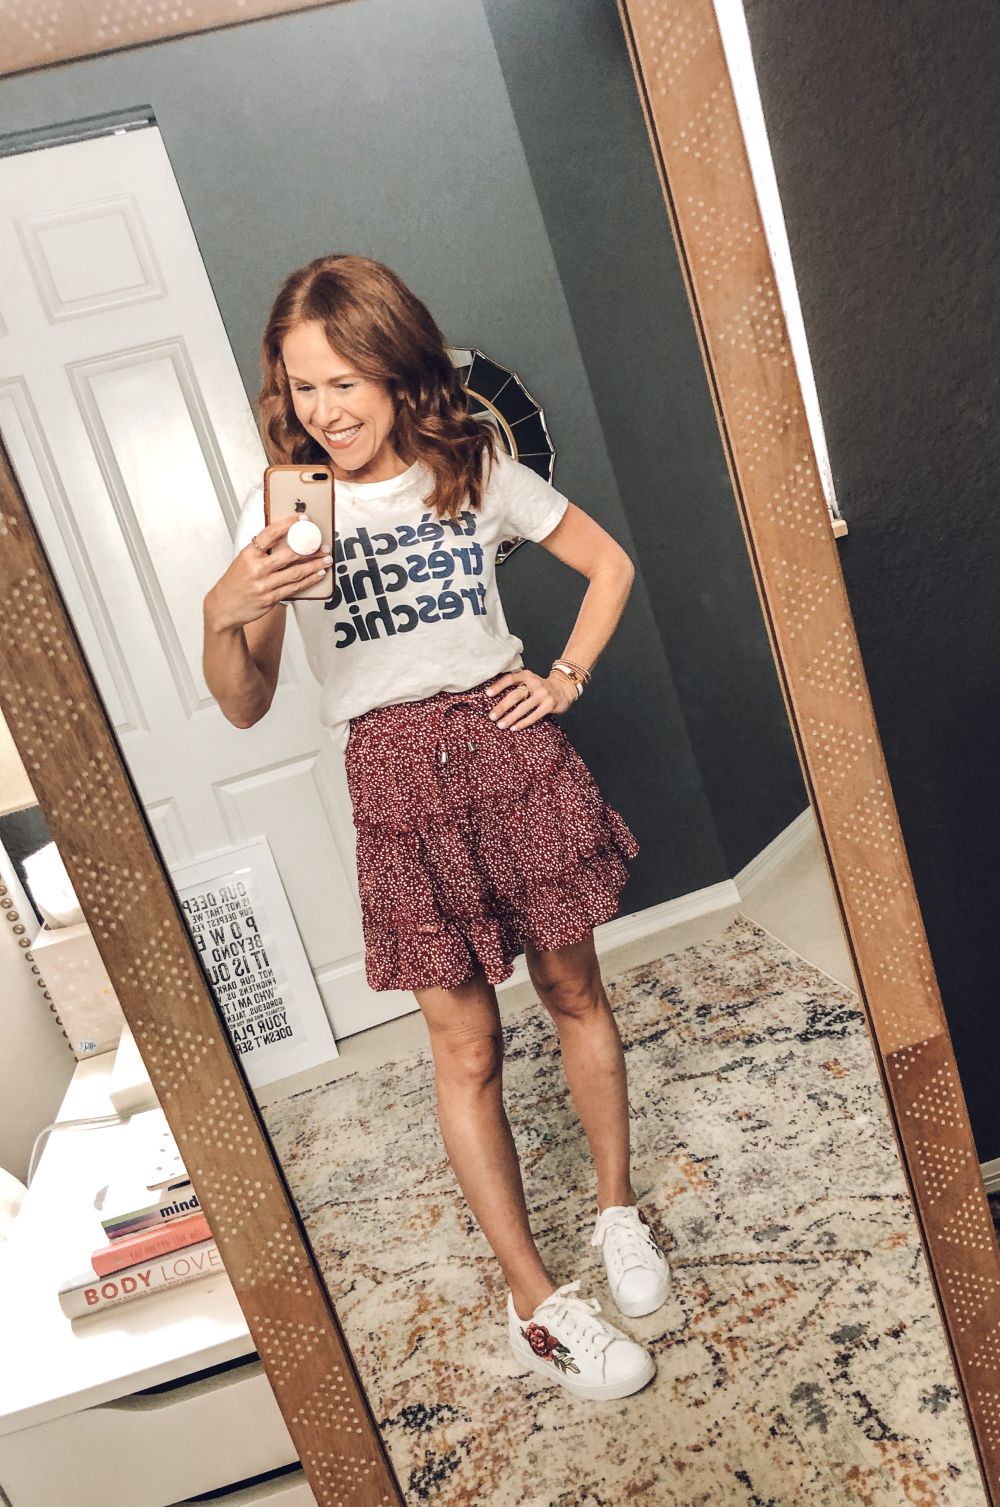 Five Ways to Wear for Fall: The Cutest Under $20 Amazon Skirt by popular Florida fashion blog, The Modern Savvy: image of a woman wearing a Amazon Salamola Women's Leopard Asymmetrical Ruffles High Waist Printed Cute Casual Mini Skirt, J. Crew t-shirt, and sneakers.